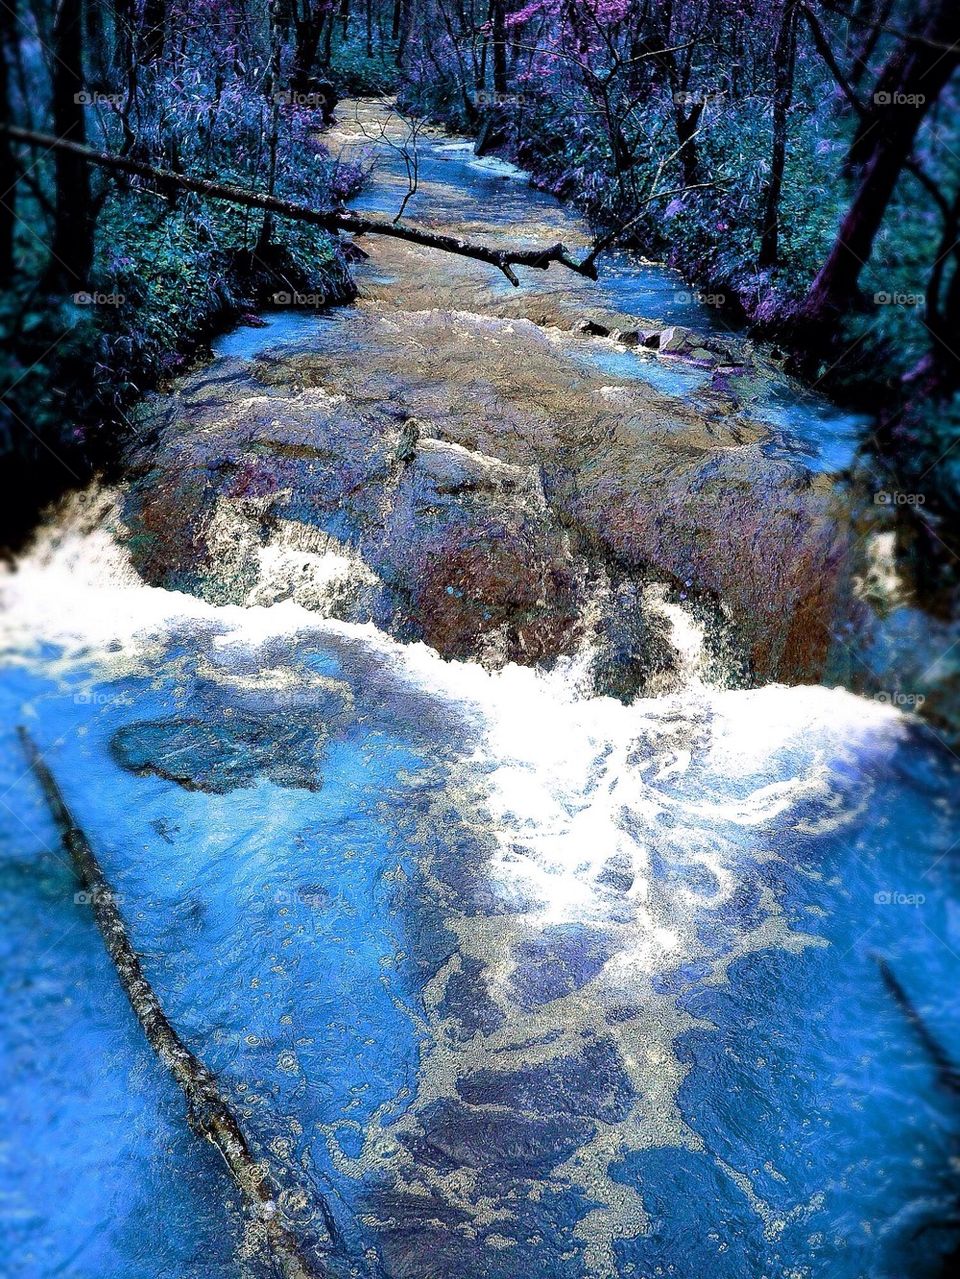 Trip Down the Psychedelic River